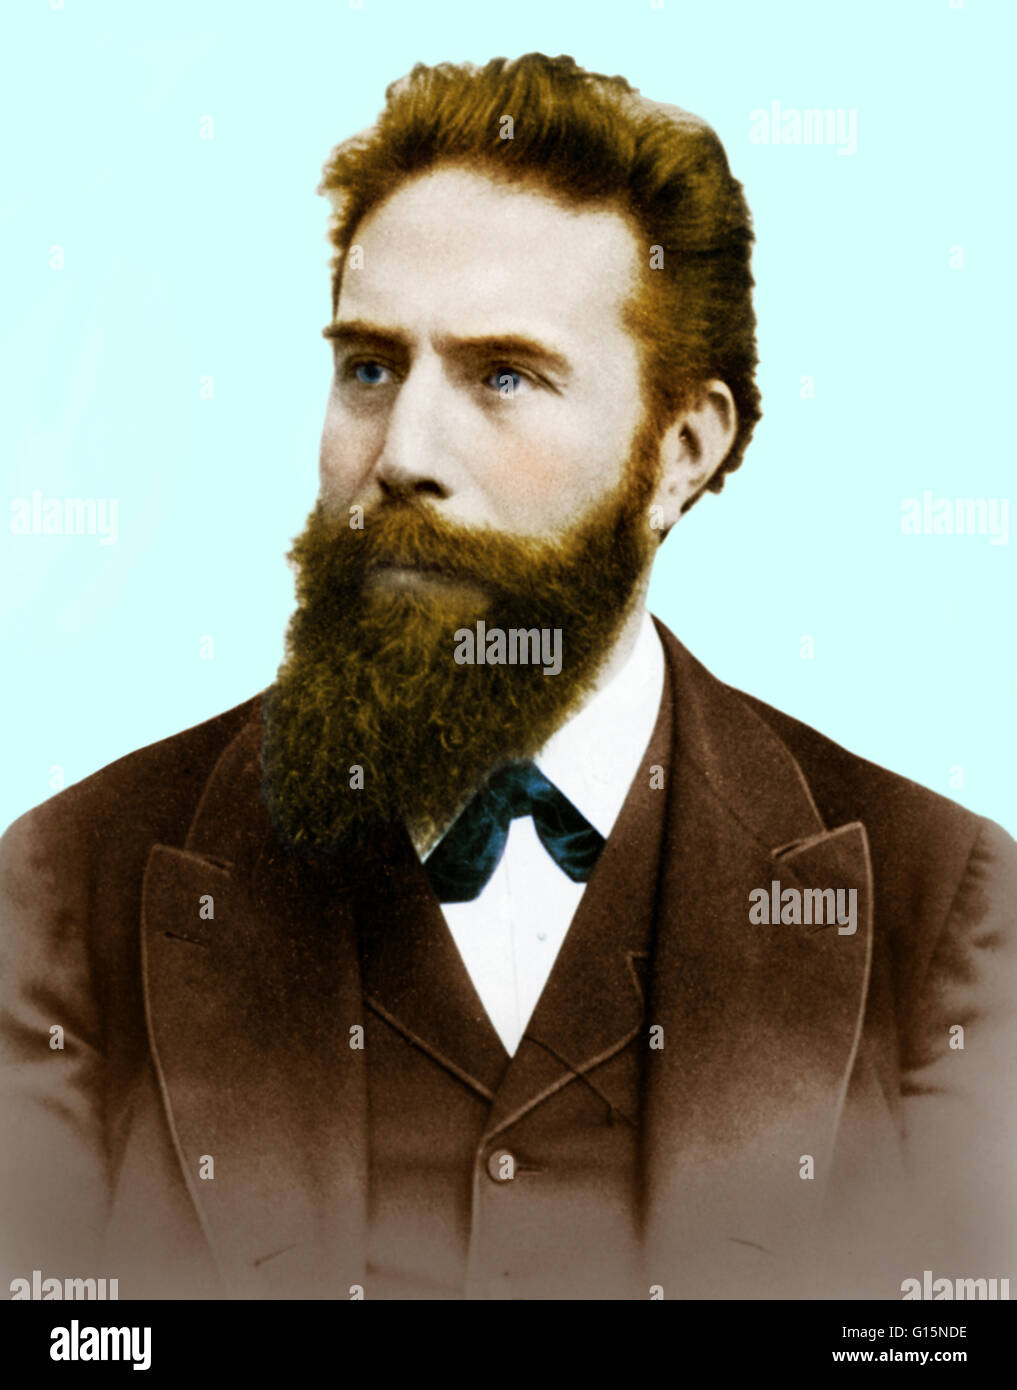 Wilhelm Konrad Roentgen (1845-1923), German experimental physicist and discoverer of X-rays. While using a discharge tube (in which an electric discharge is passed through a gas at low pressure) in a darkened room, Roentgen noticed that a card coated with Stock Photo